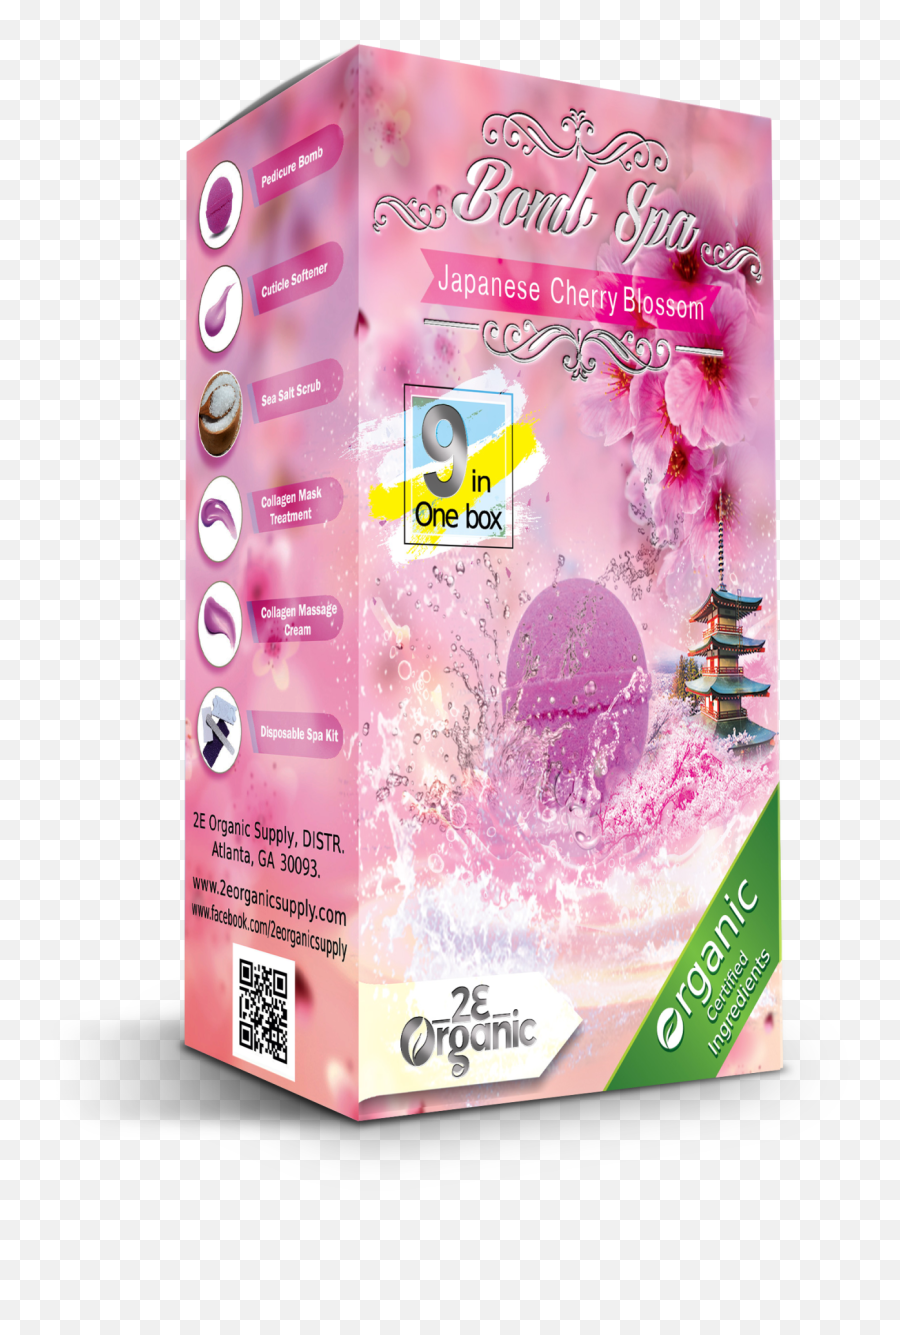 2e Organic 9 In 1 Bomb Spa Japanese Cherry Blossom Single - Packaging And Labeling Png,Japanese Cherry Blossom Png